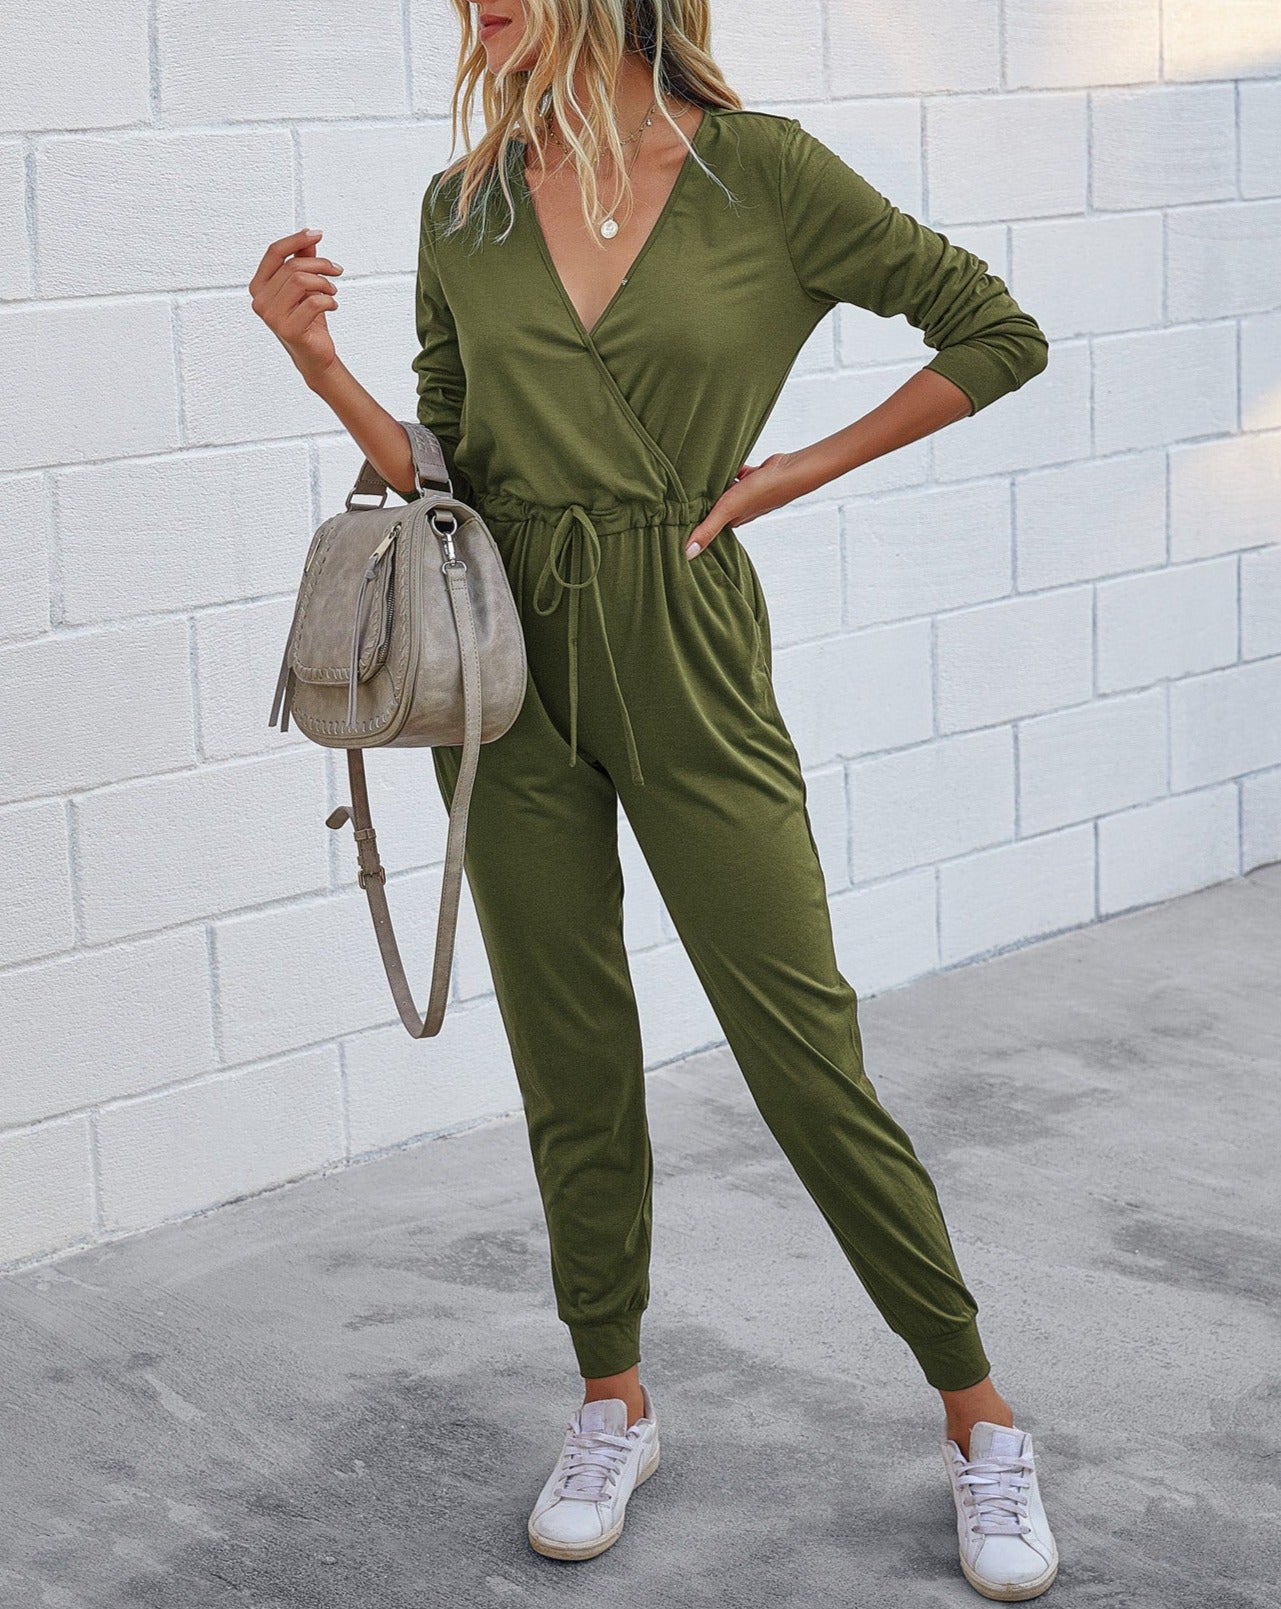 Women's Clothing Jumpsuit with a Slim Fit